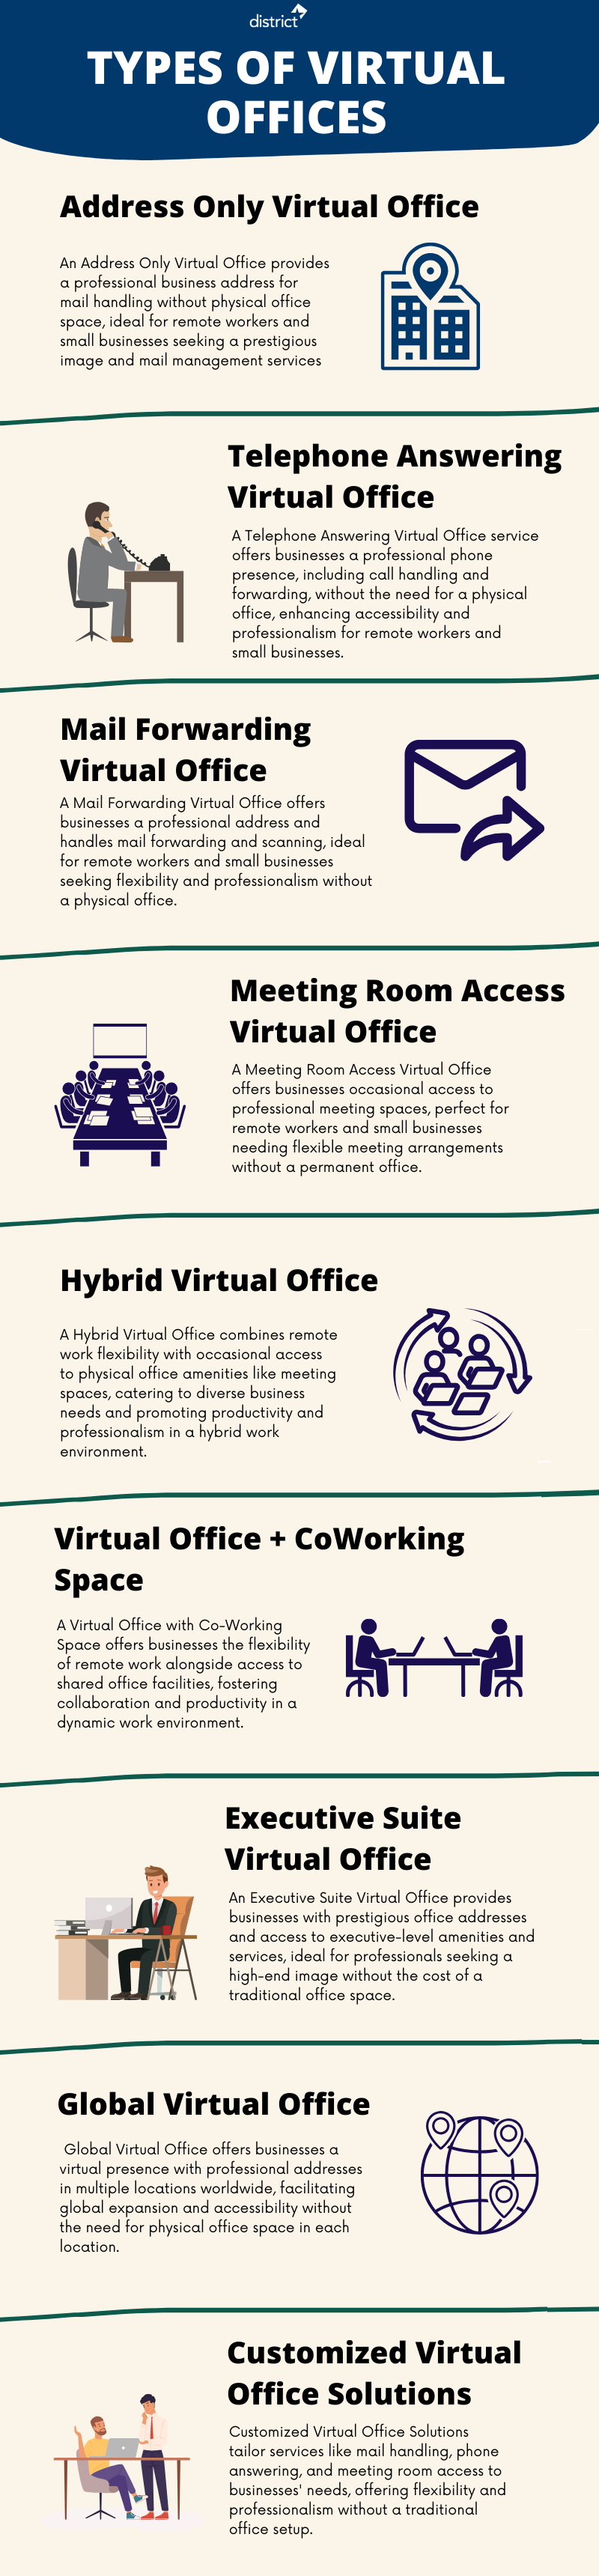 what is a virtual offices and its types infographic